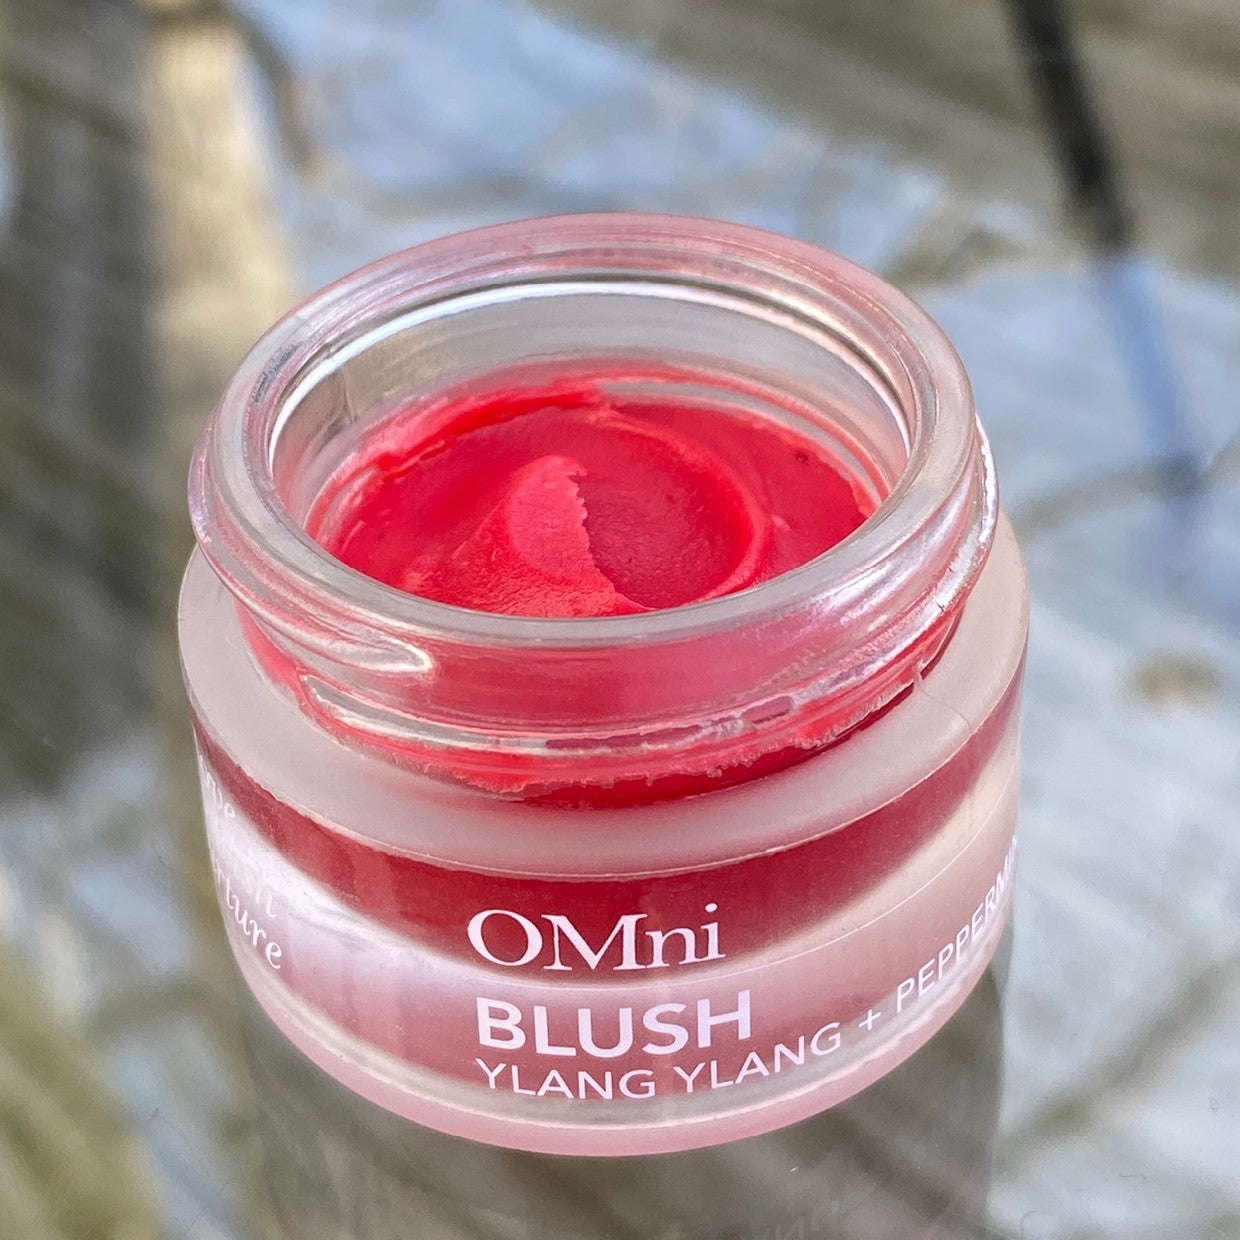 OMni Blush natural multi-use balm for dry lips and skin, and blush on cheeks #2